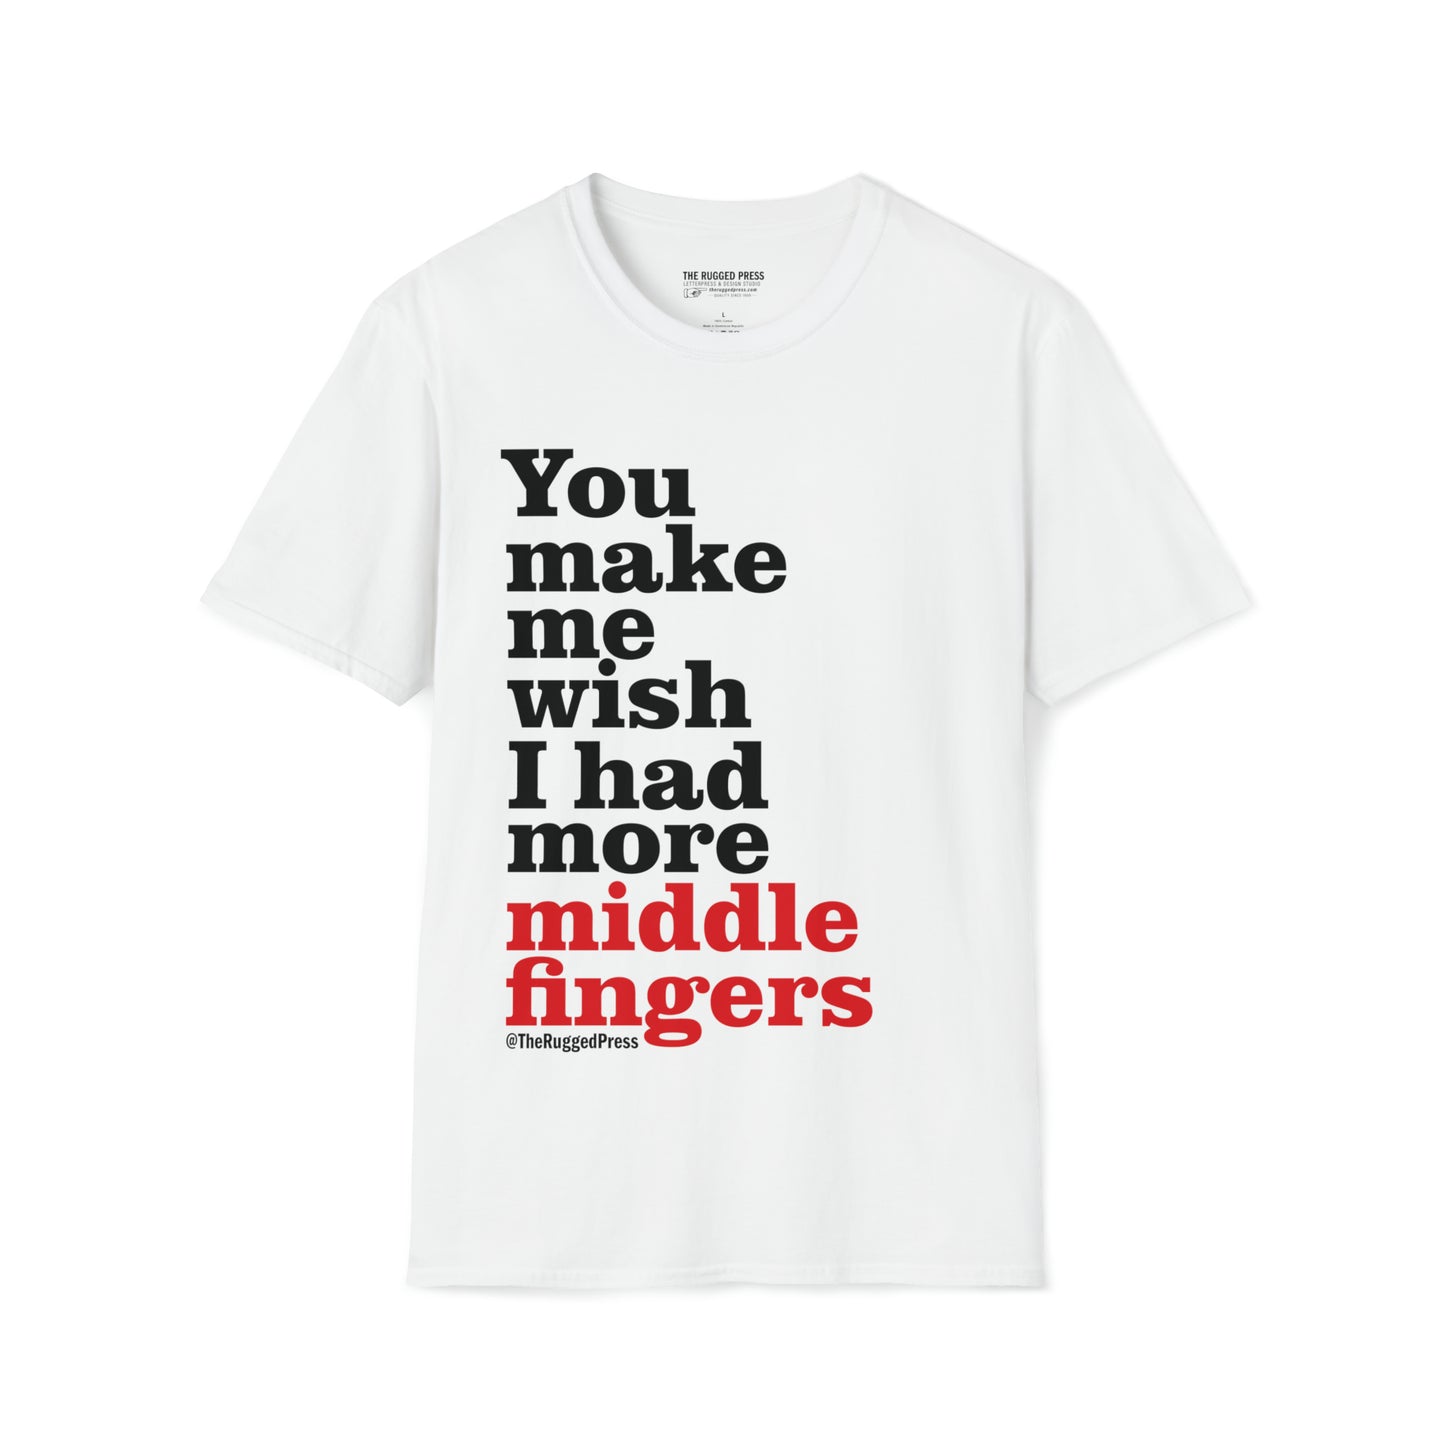 You make me wish I had more middle fingers – t-shirt